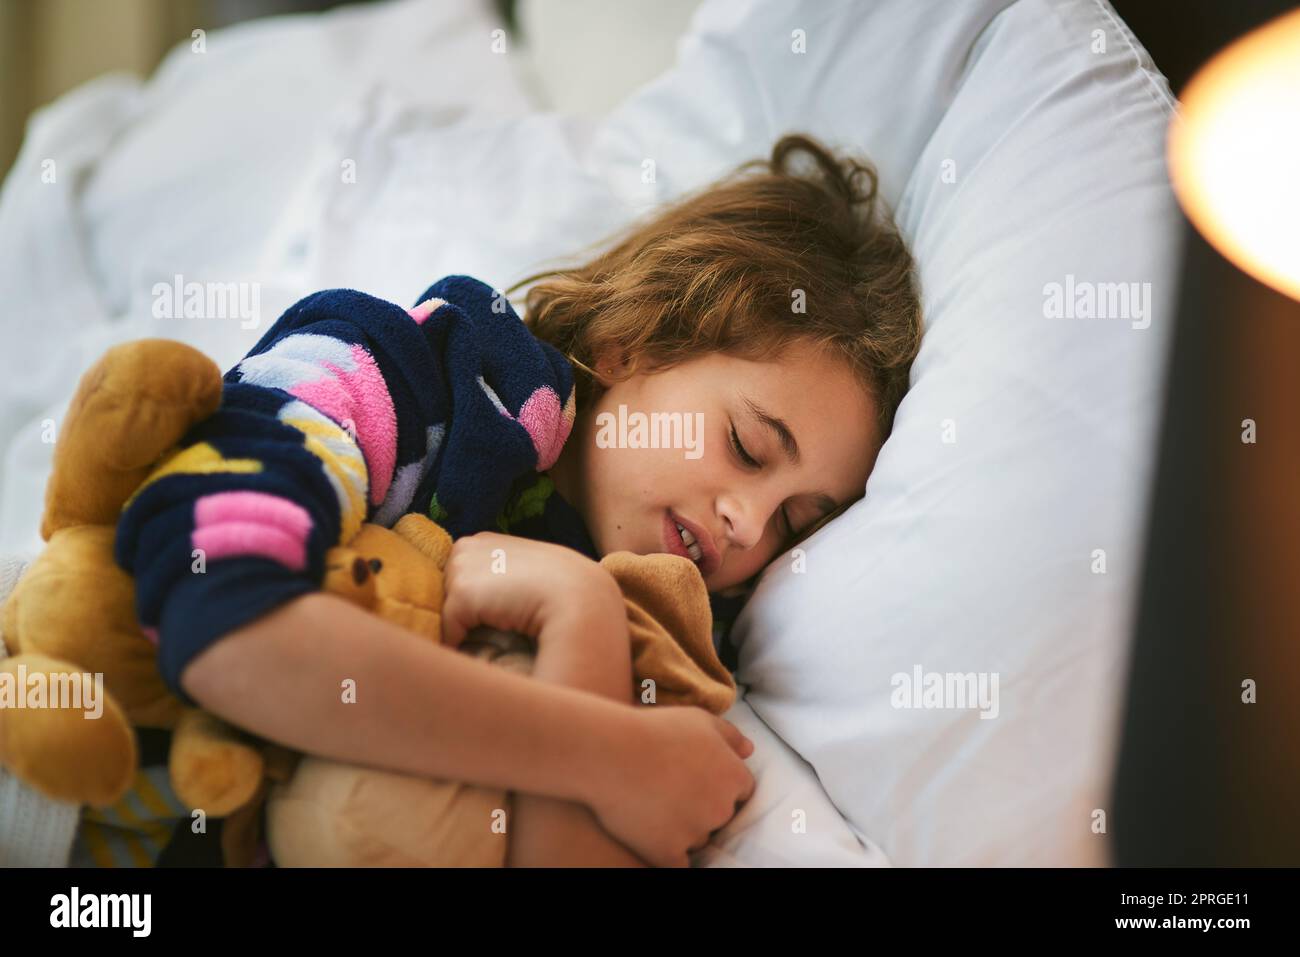 Naptime companions. a young girl sleeping with soft toys. Stock Photo